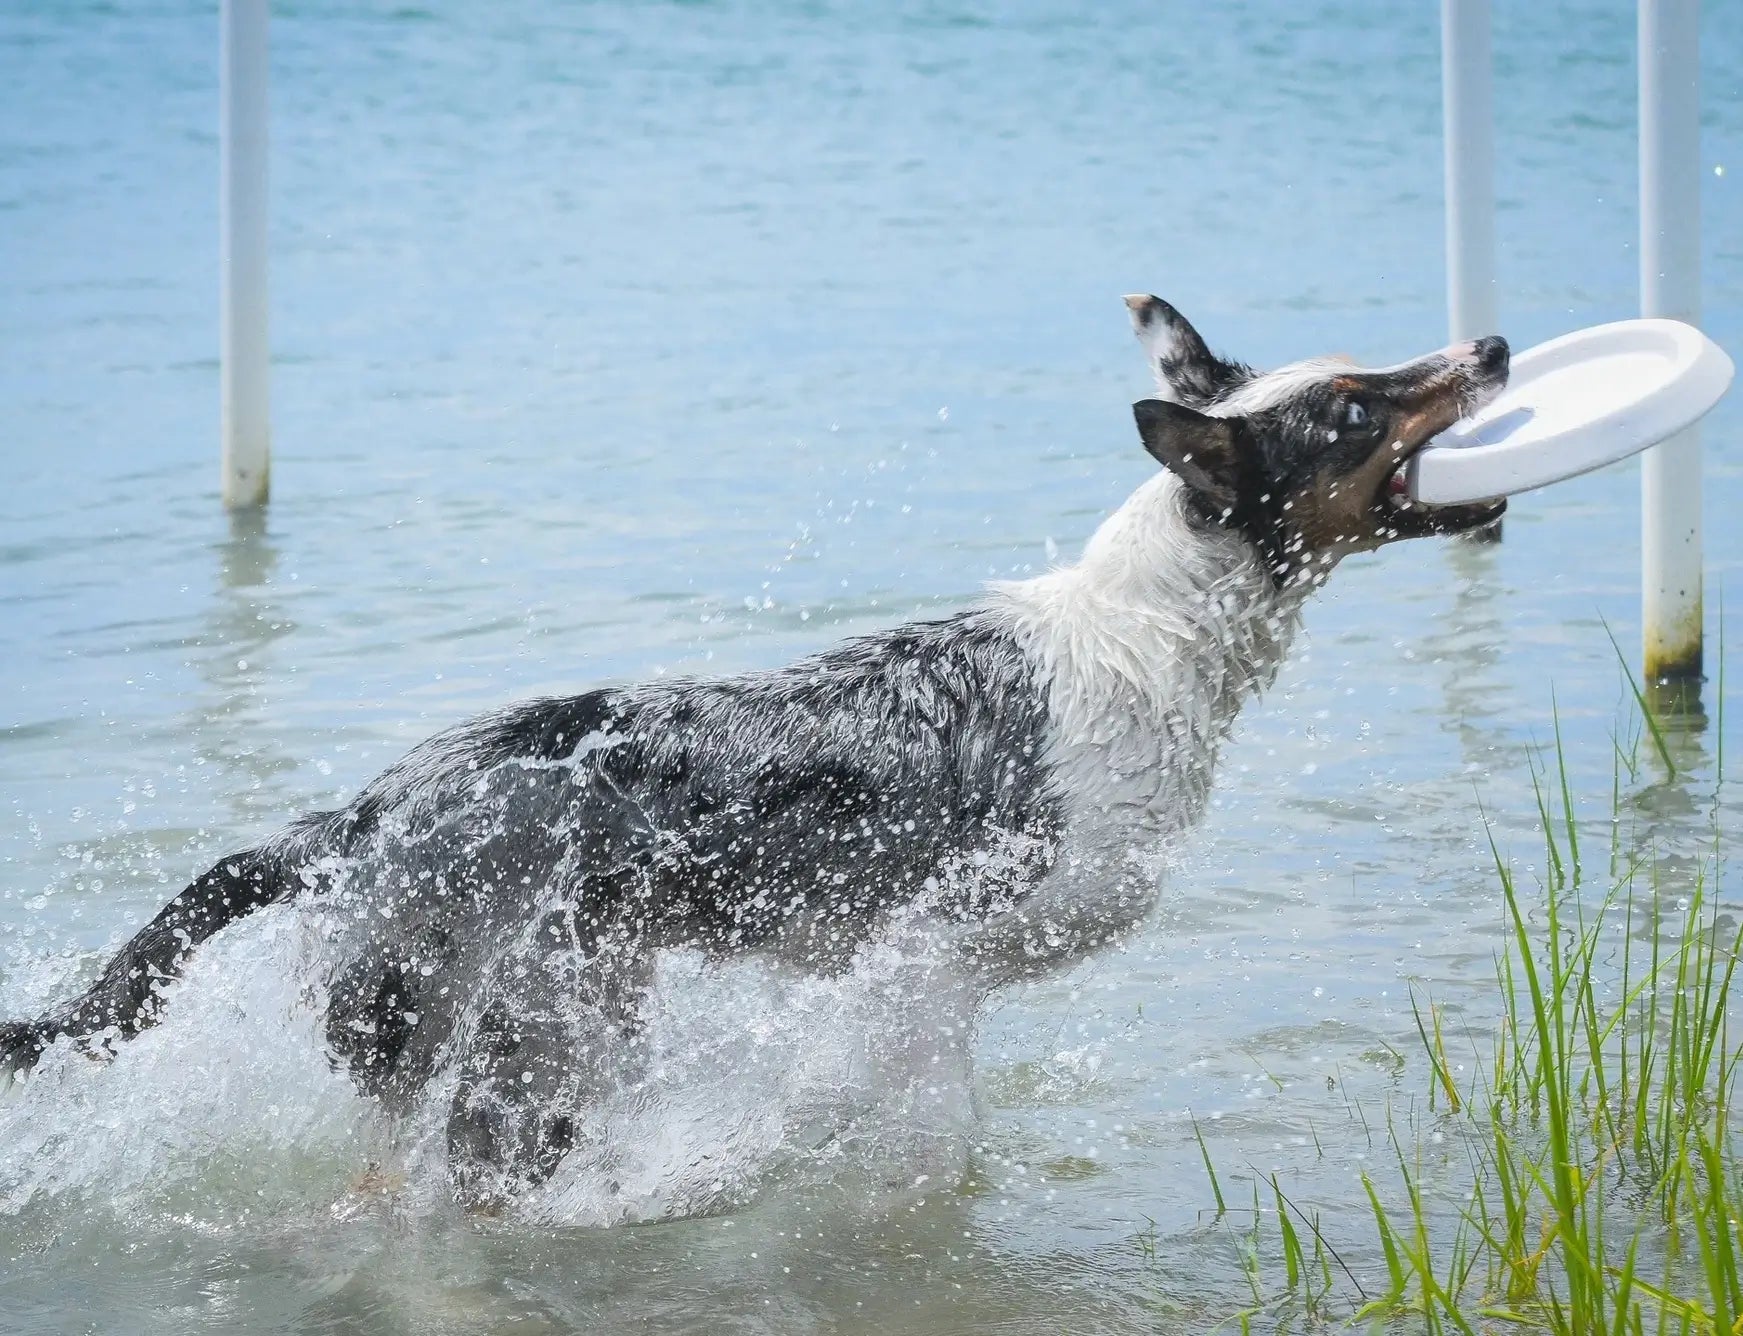 Border Collie is about to jump and catch a white dog frisbee in the water.